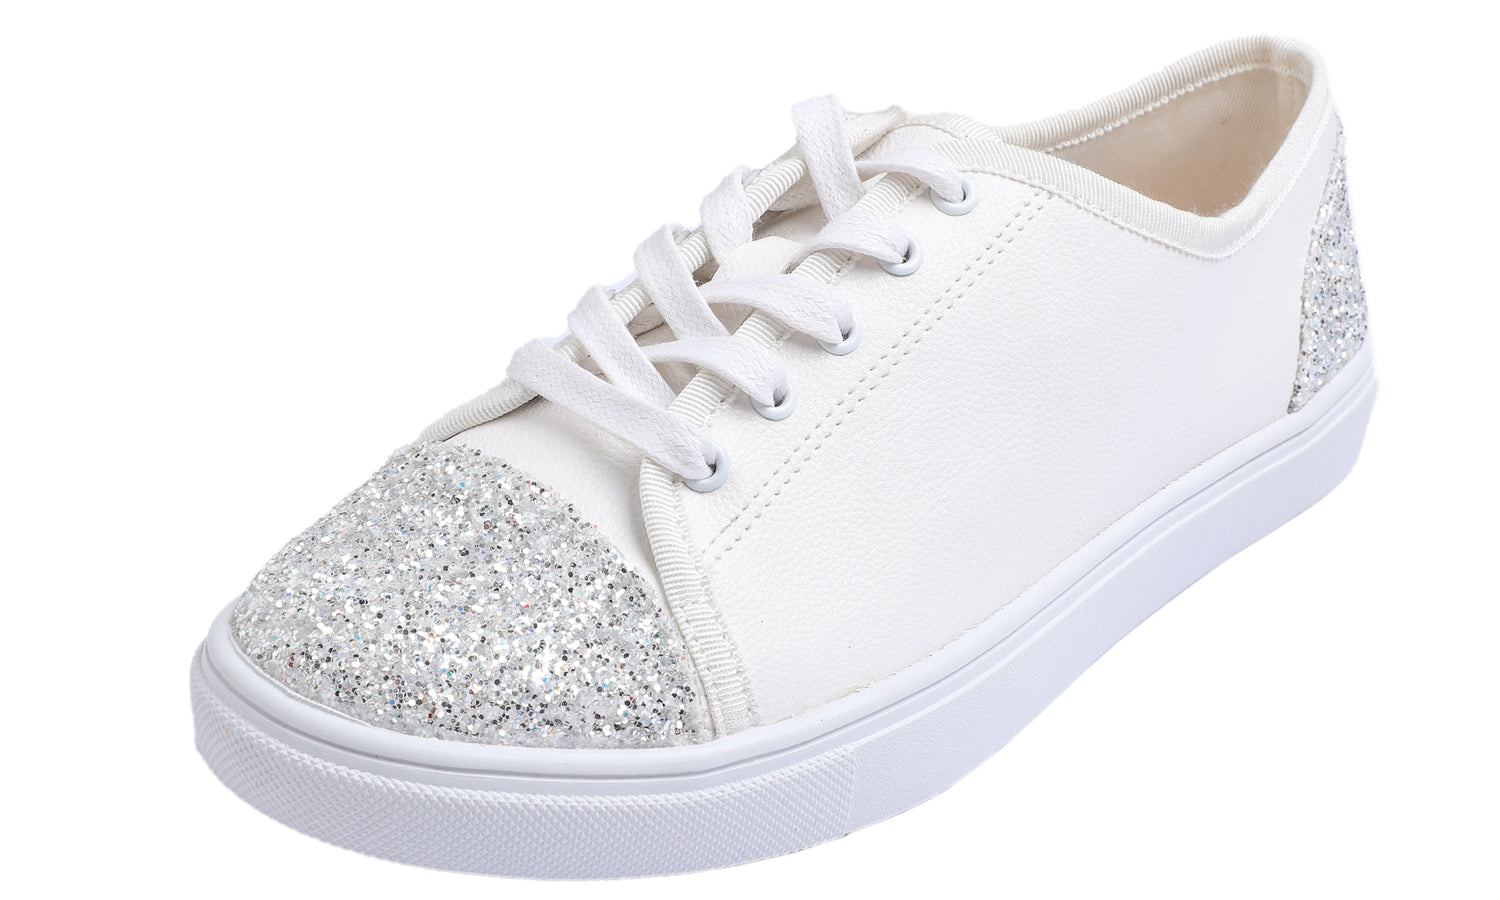 Feversole Women's Fashion Dress Sneakers Party Bling Casual Flats Embellished Shoes Ice Silver Glitter Cap Lace Up